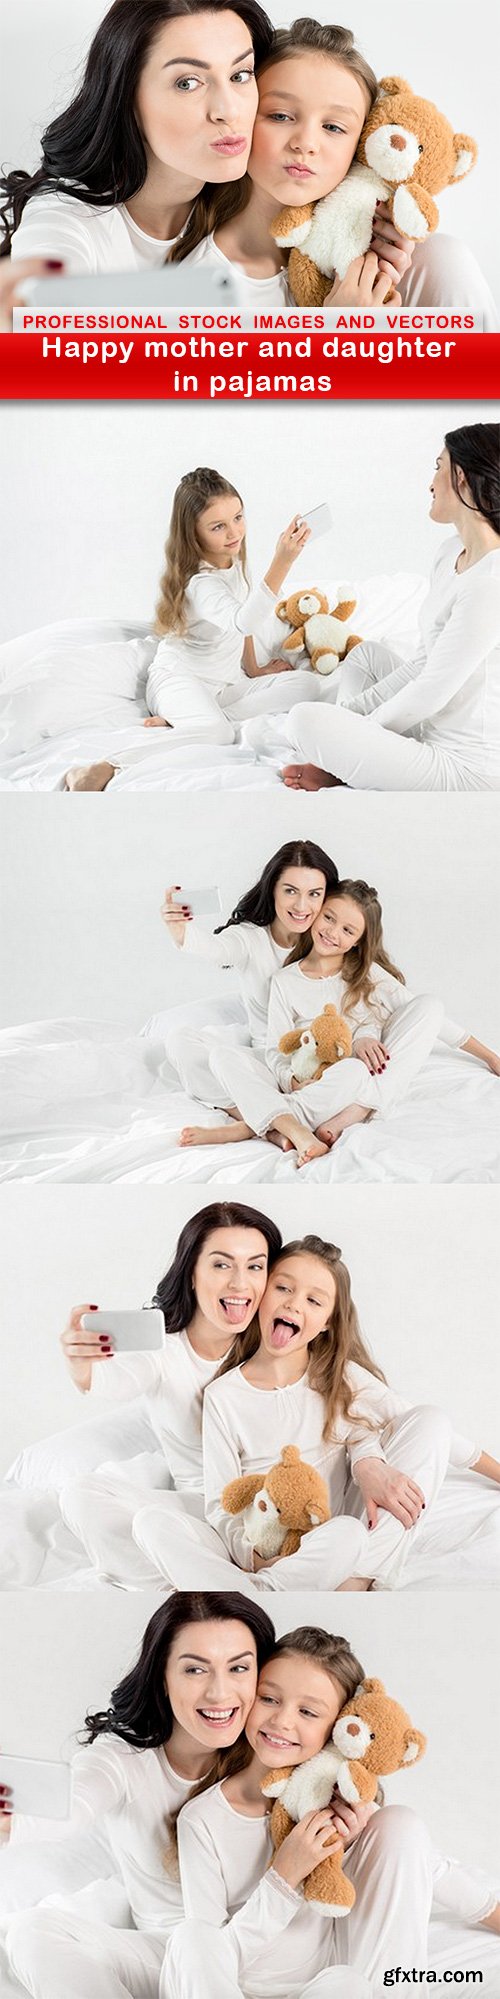 Happy mother and daughter in pajamas - 5 UHQ JPEG